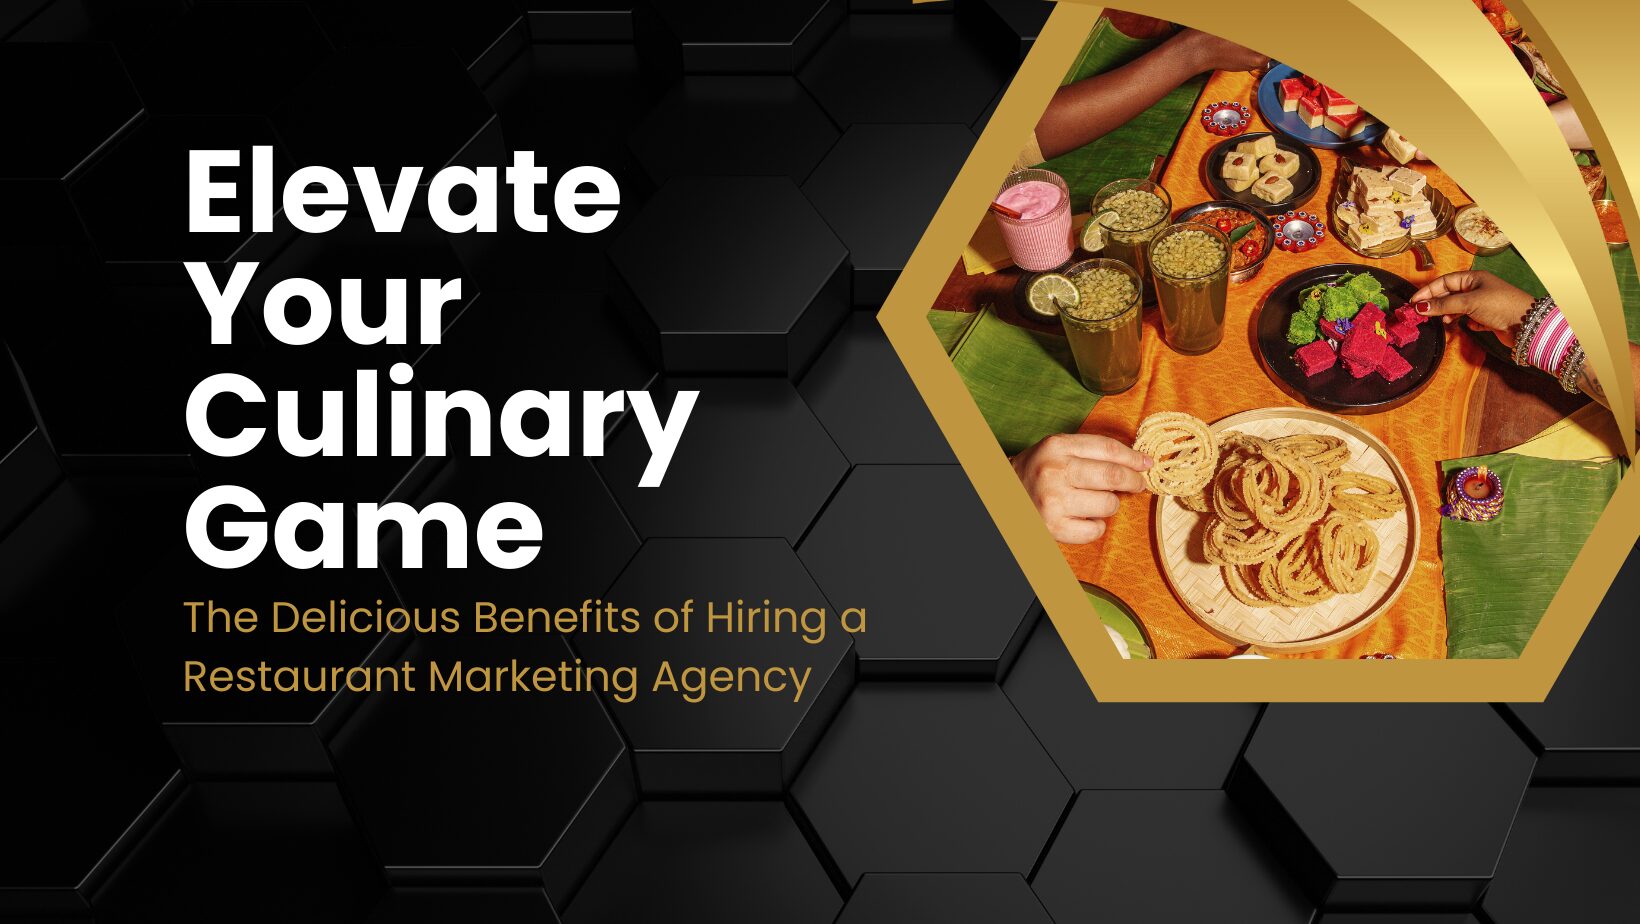 Graphic with food spread with the words "The Delicious Benefits of Hiring a Restaurant Marketing Agency"